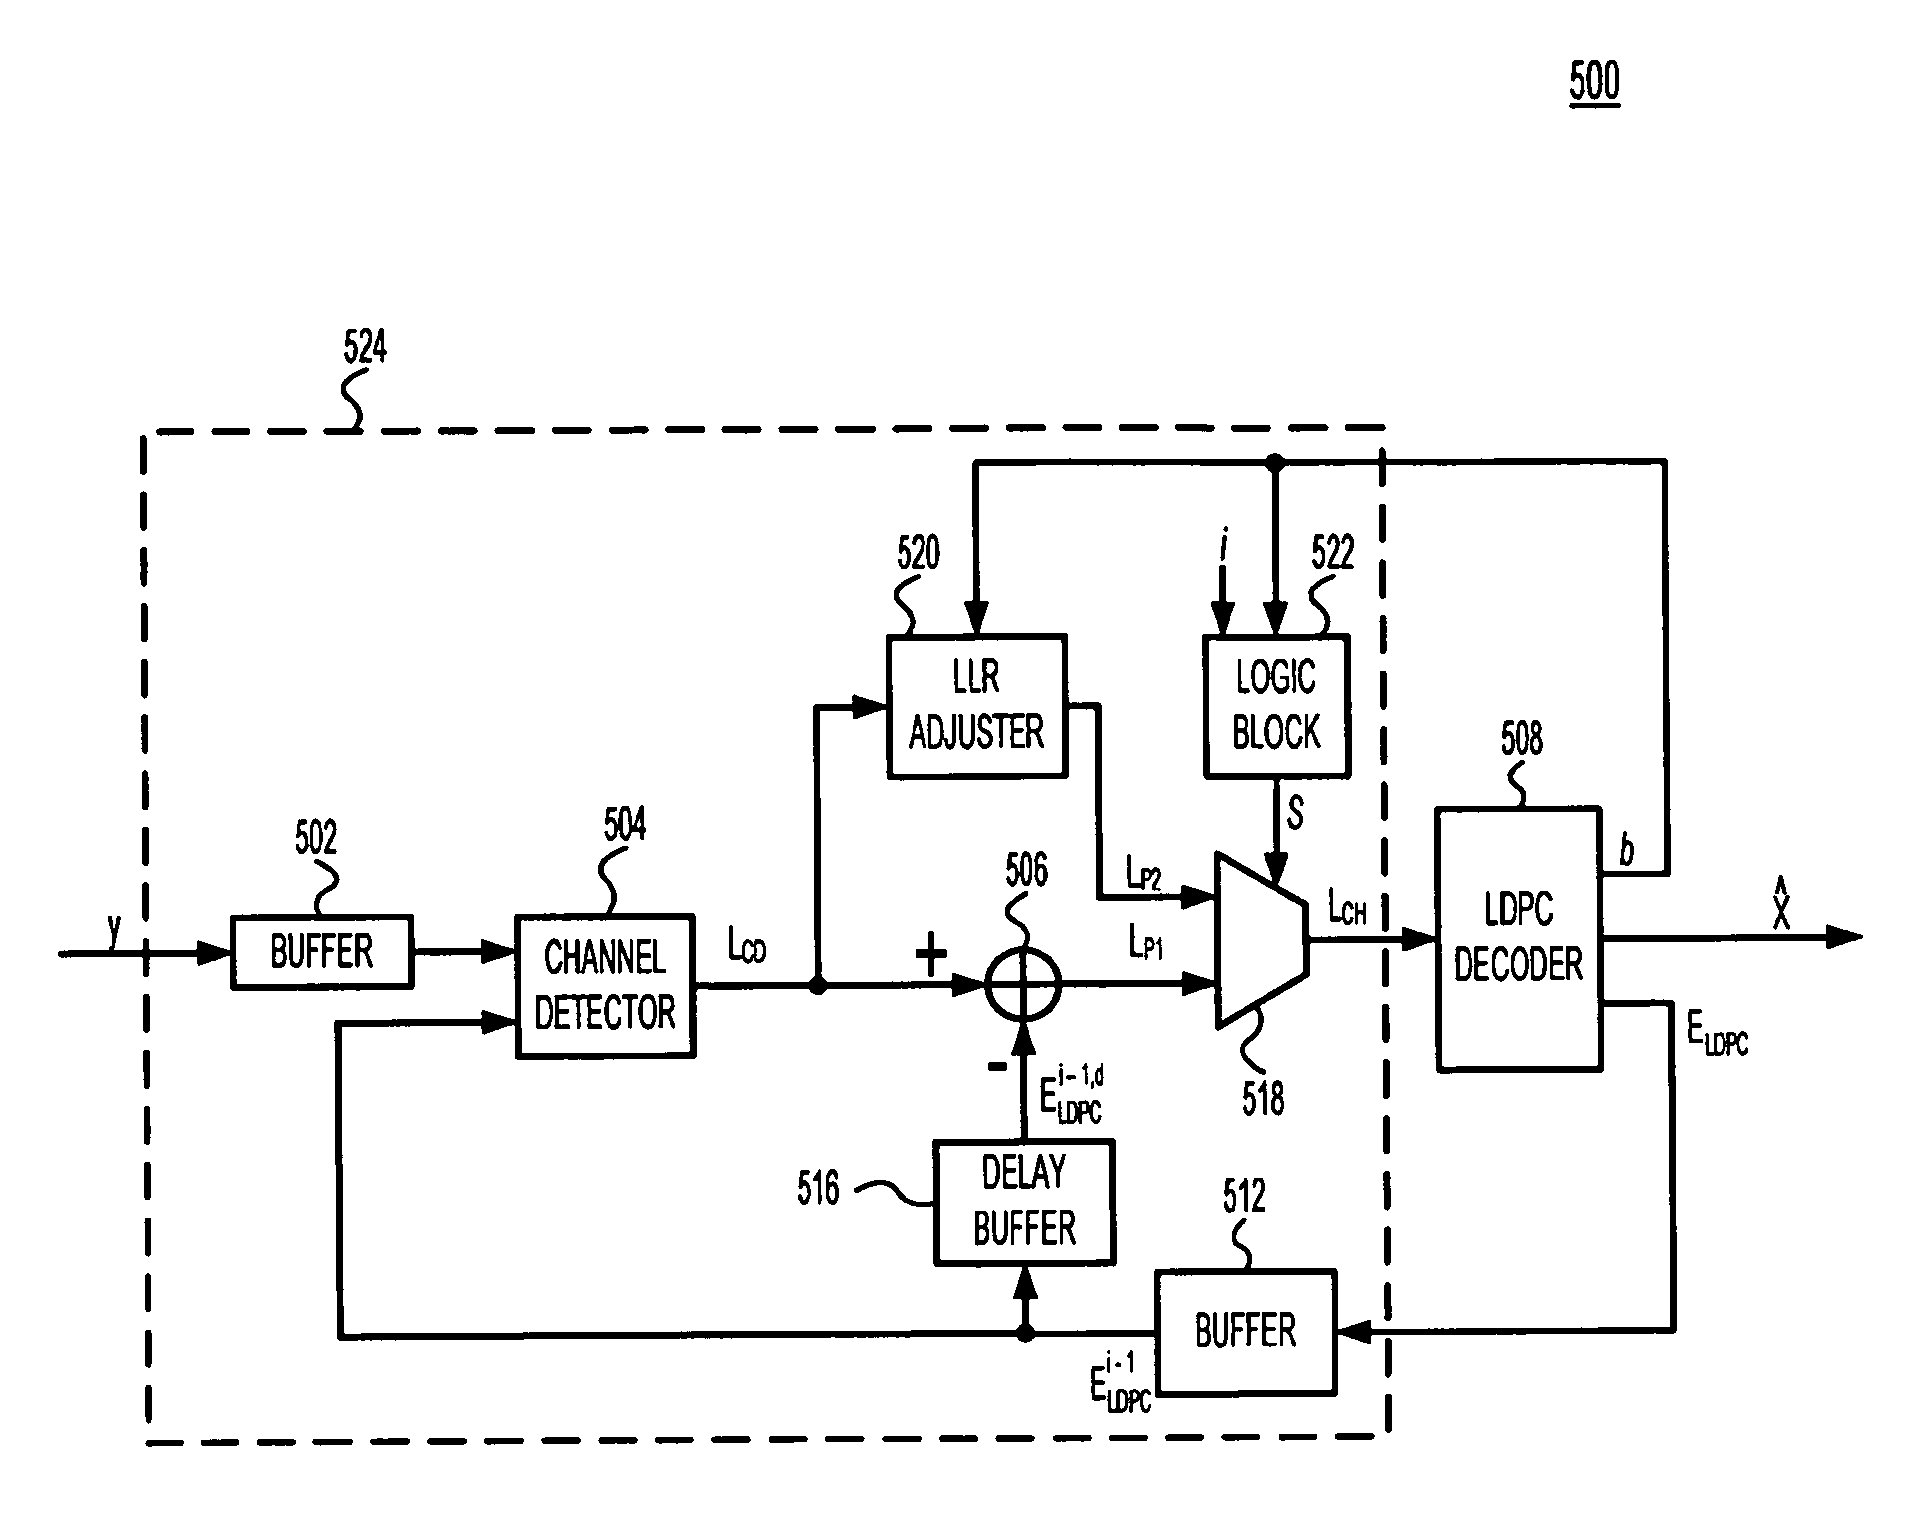 Turbo-equalization methods for iterative decoders